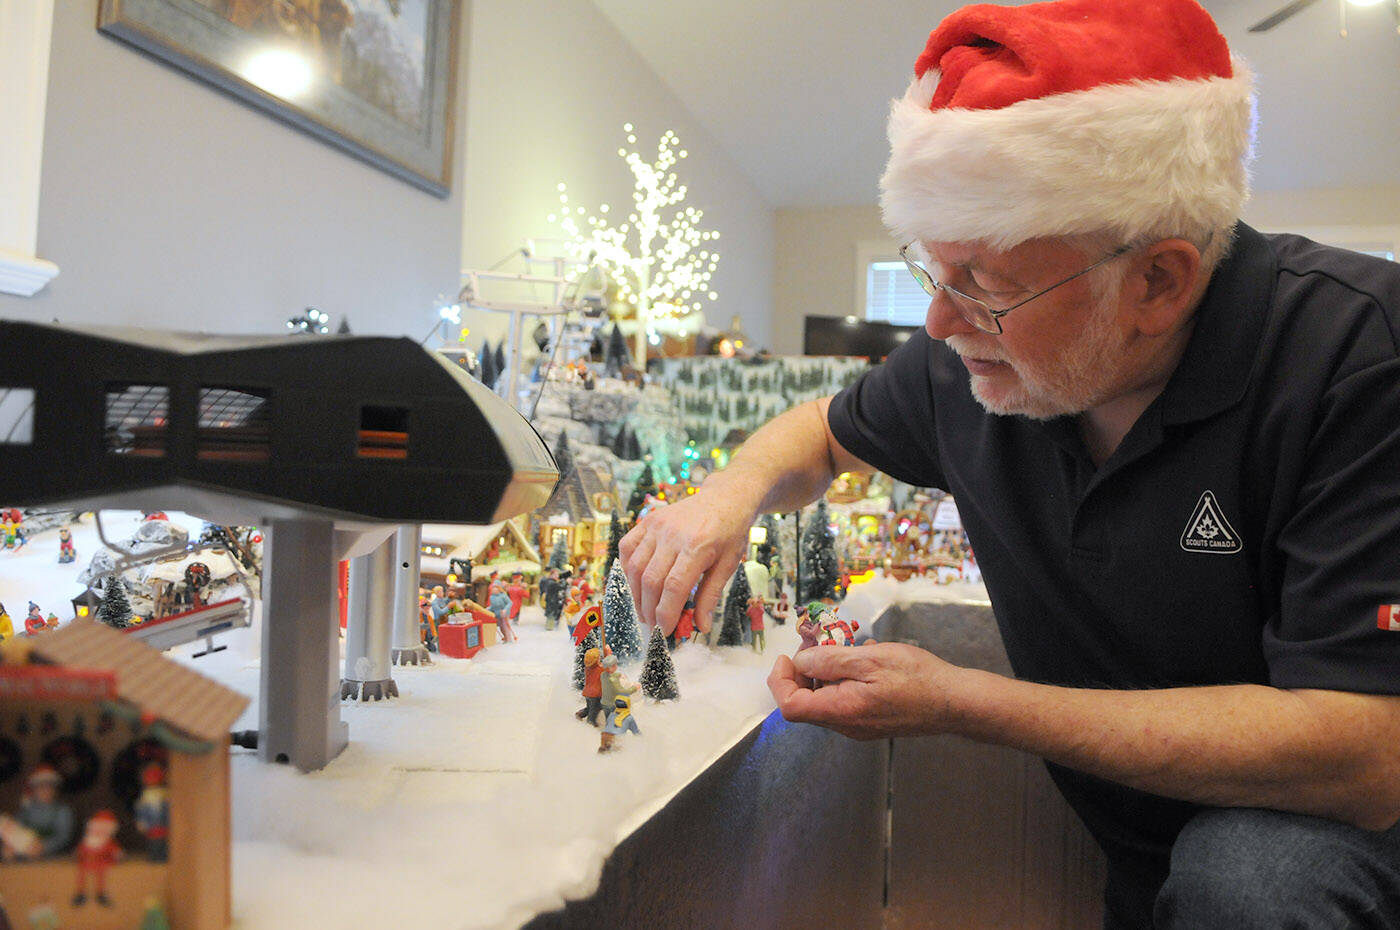 Terry Campbell’s display of Christmas miniatures takes up the entire dining room of his Chilliwack home. He started the display in 2007 but it has been more challenging for him lately as he’s been legally blind since 2018. (Jenna Hauck/ Chilliwack Progress)